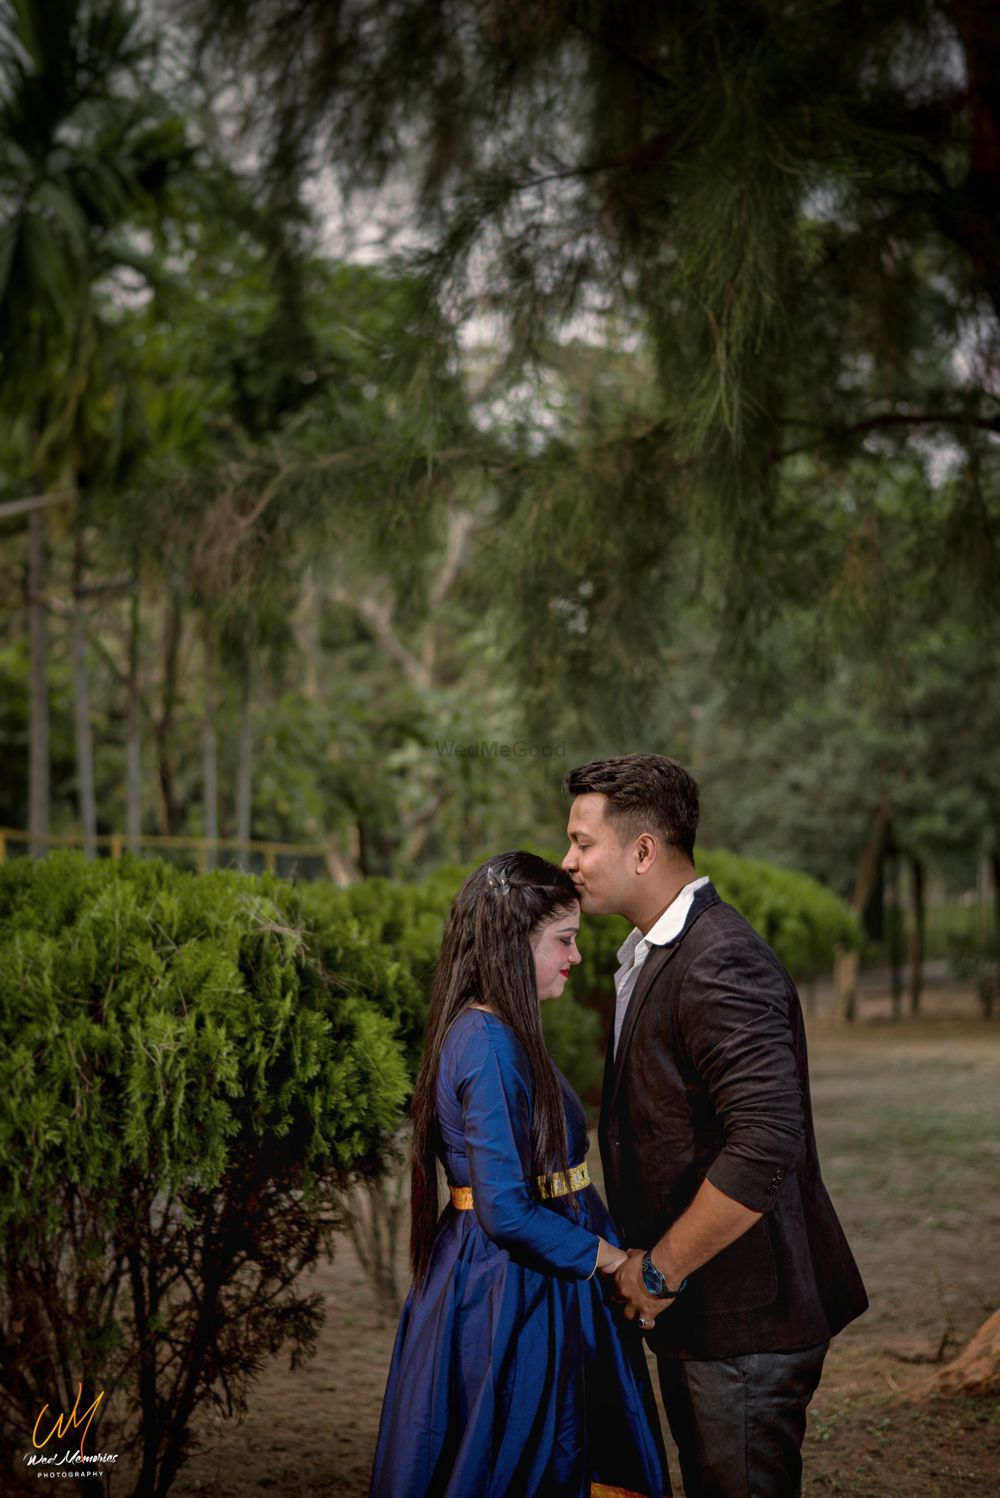 Photo From PRE-WEDDING - By Weddmemoriess